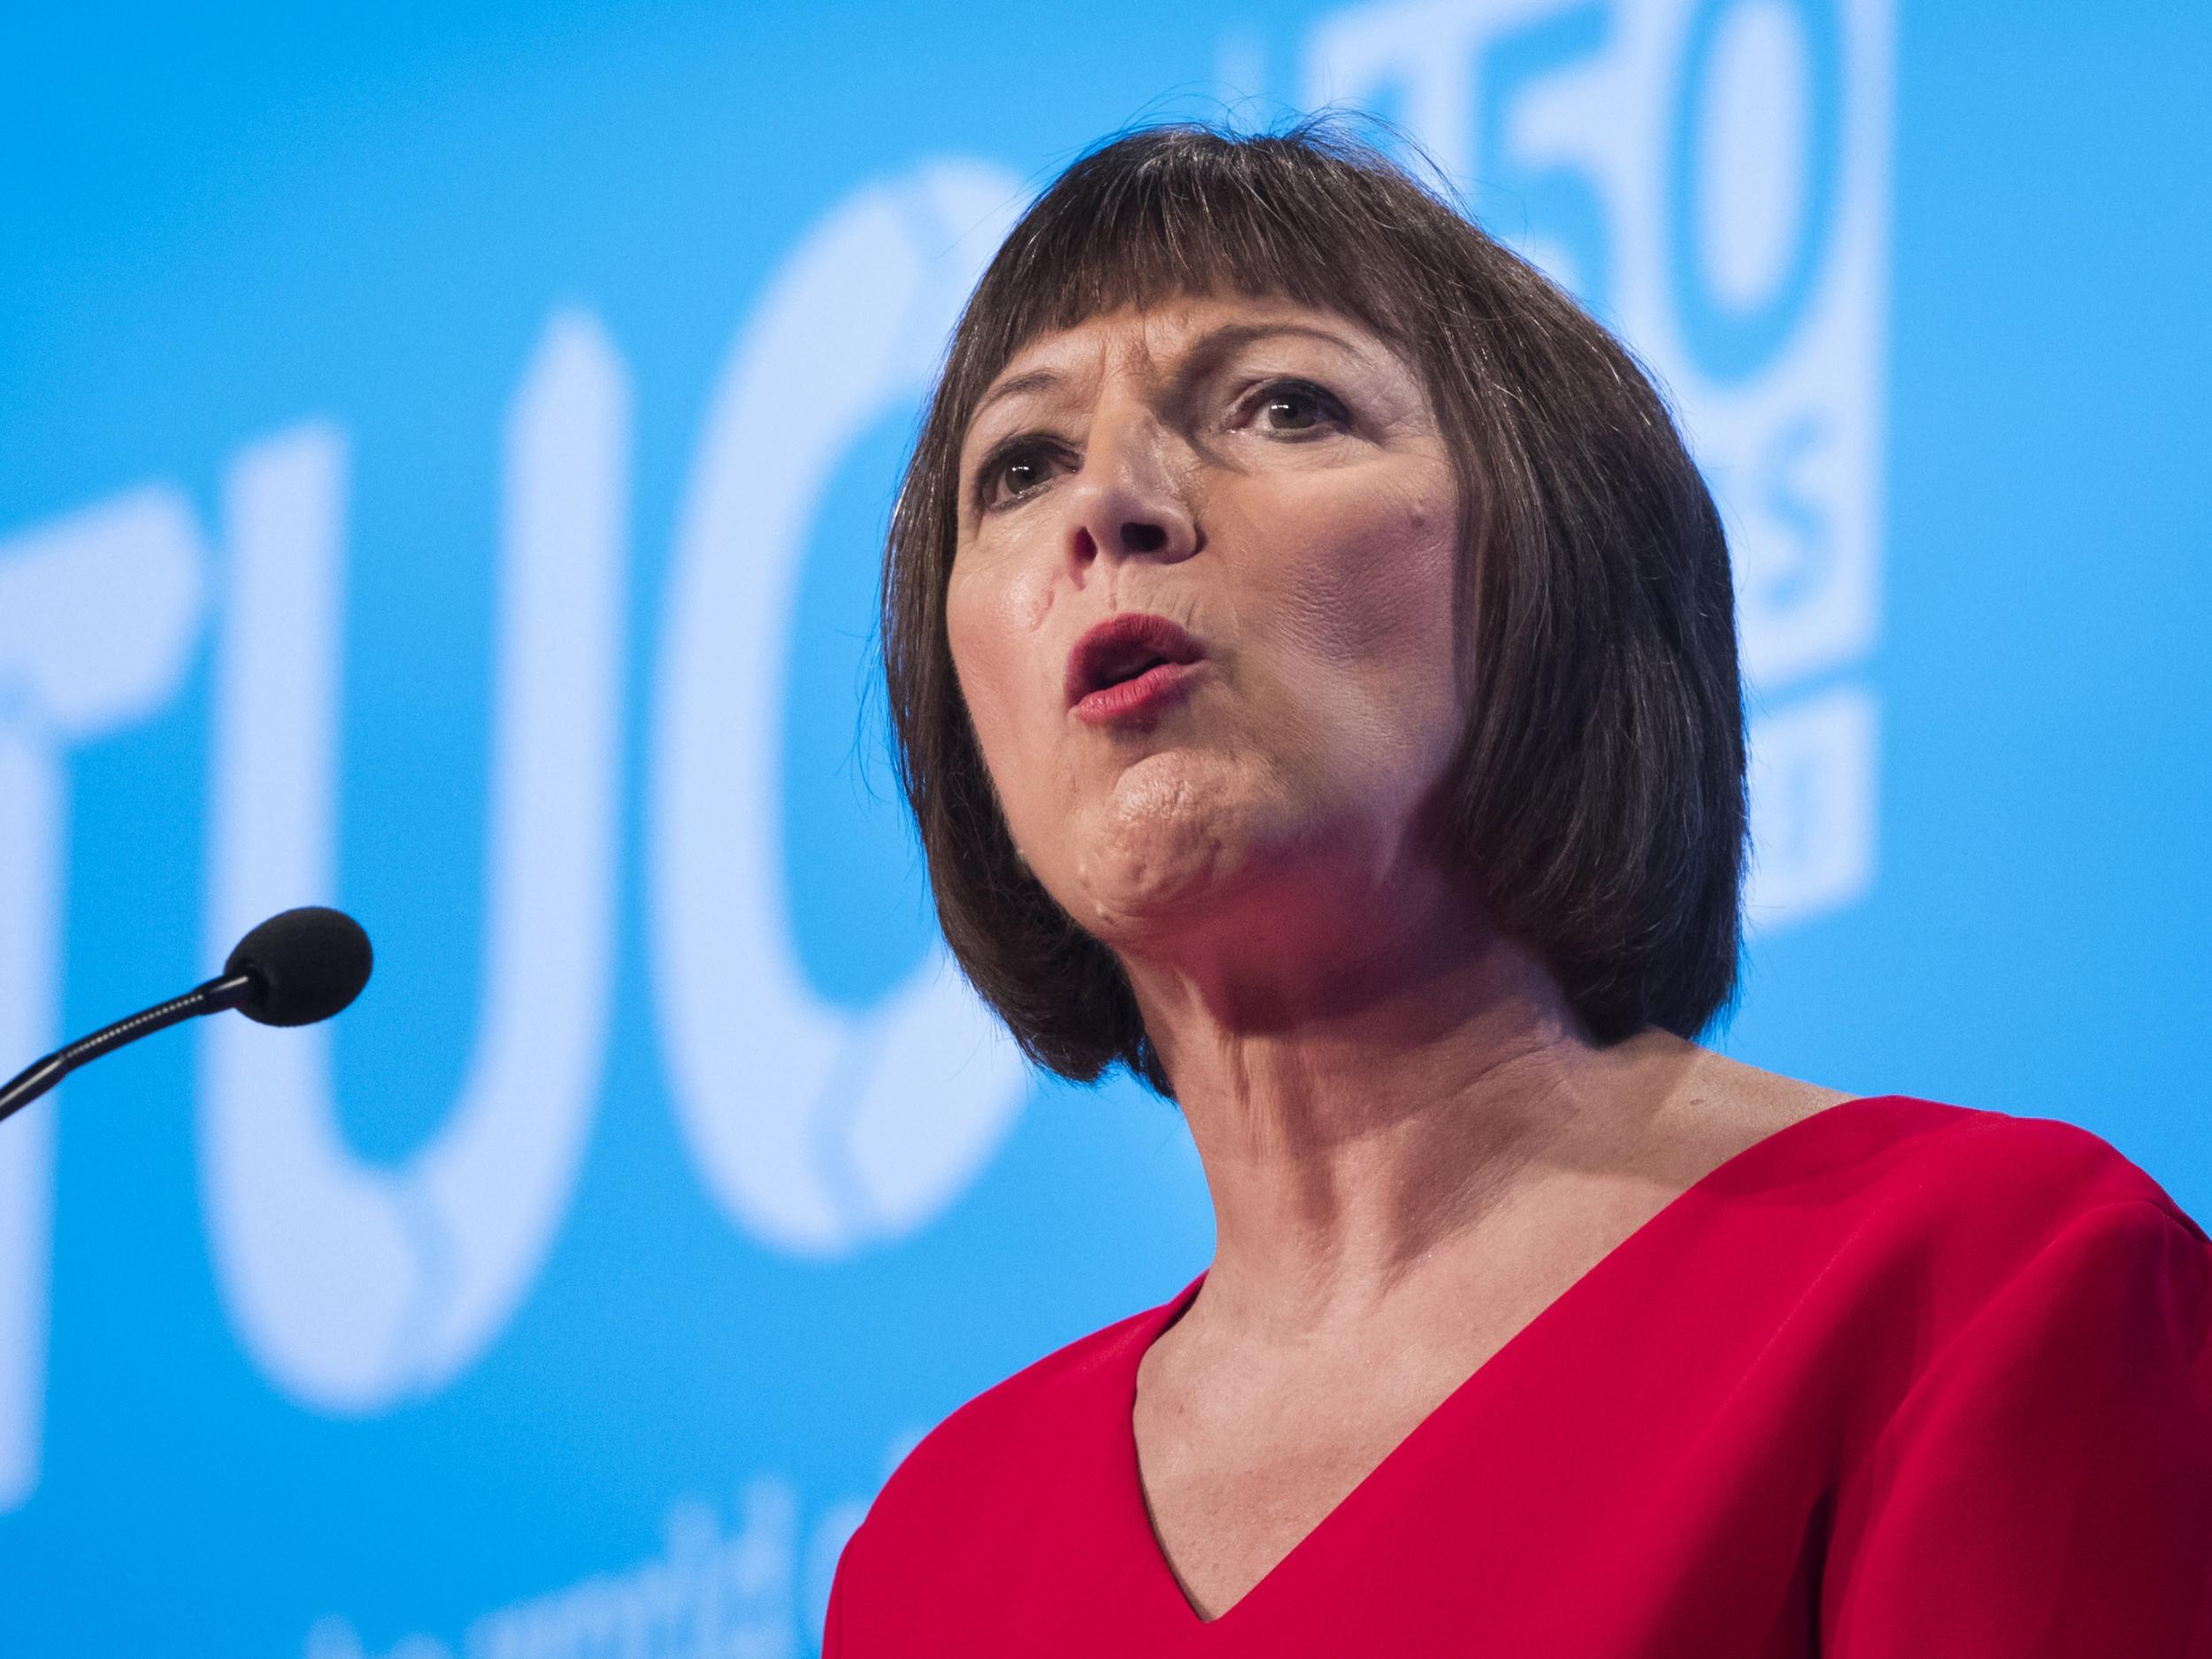 ‘Our job is to fight for working people, not against each other,’ says Frances O’Grady